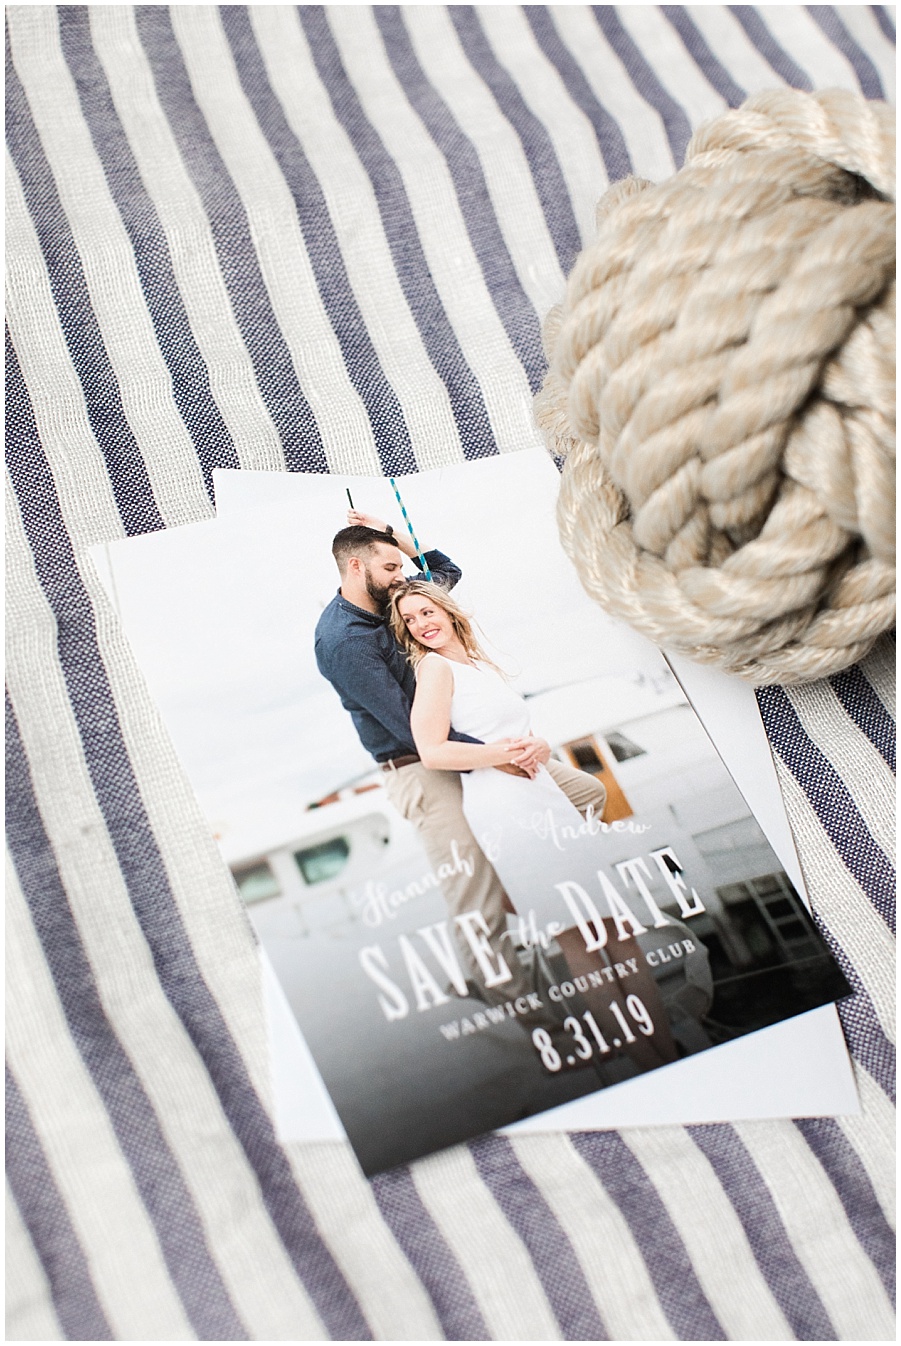 Nautical Save the Dates by Basic Invite 